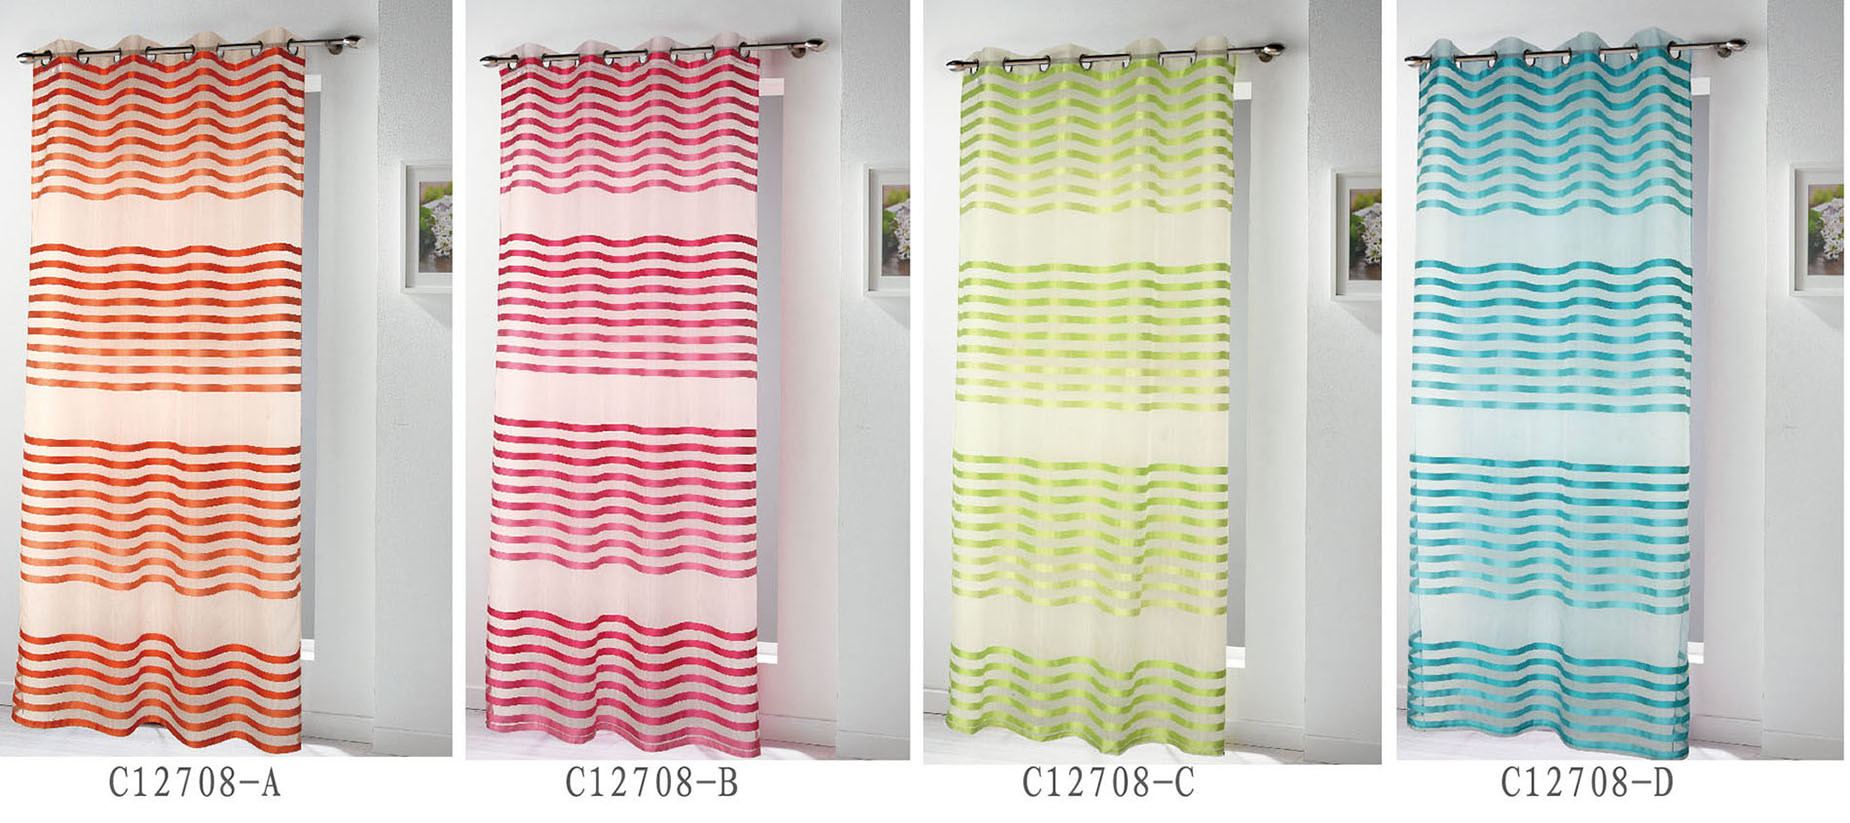 Polyester Stripe Voile Curtain Valance